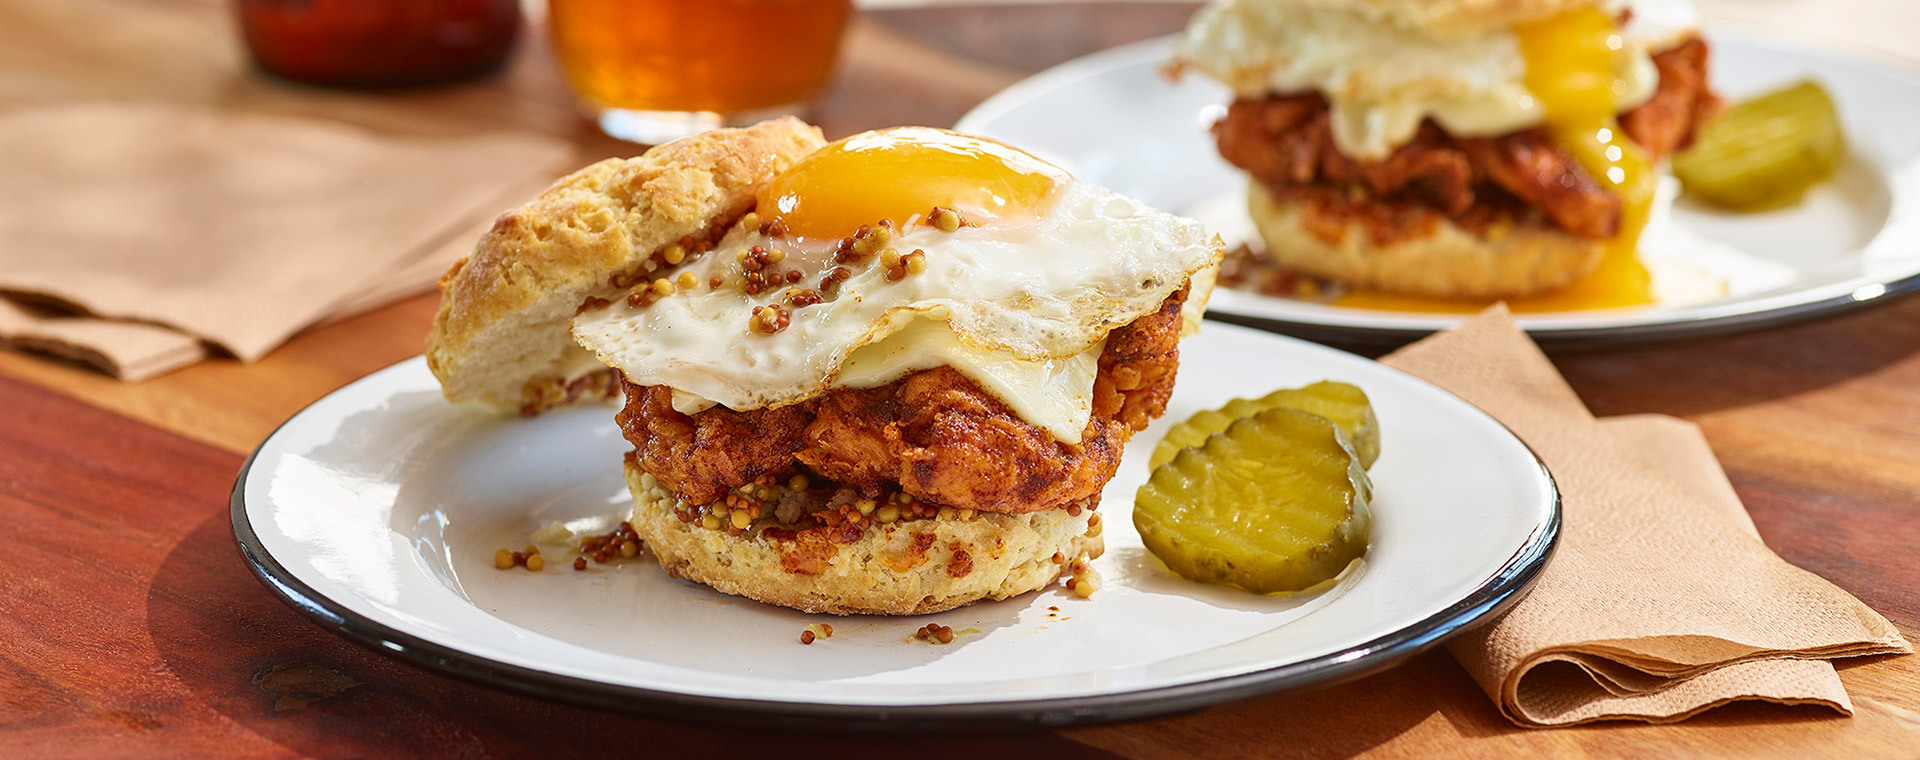 Nashville hot chicken with fried egg and side of pickles